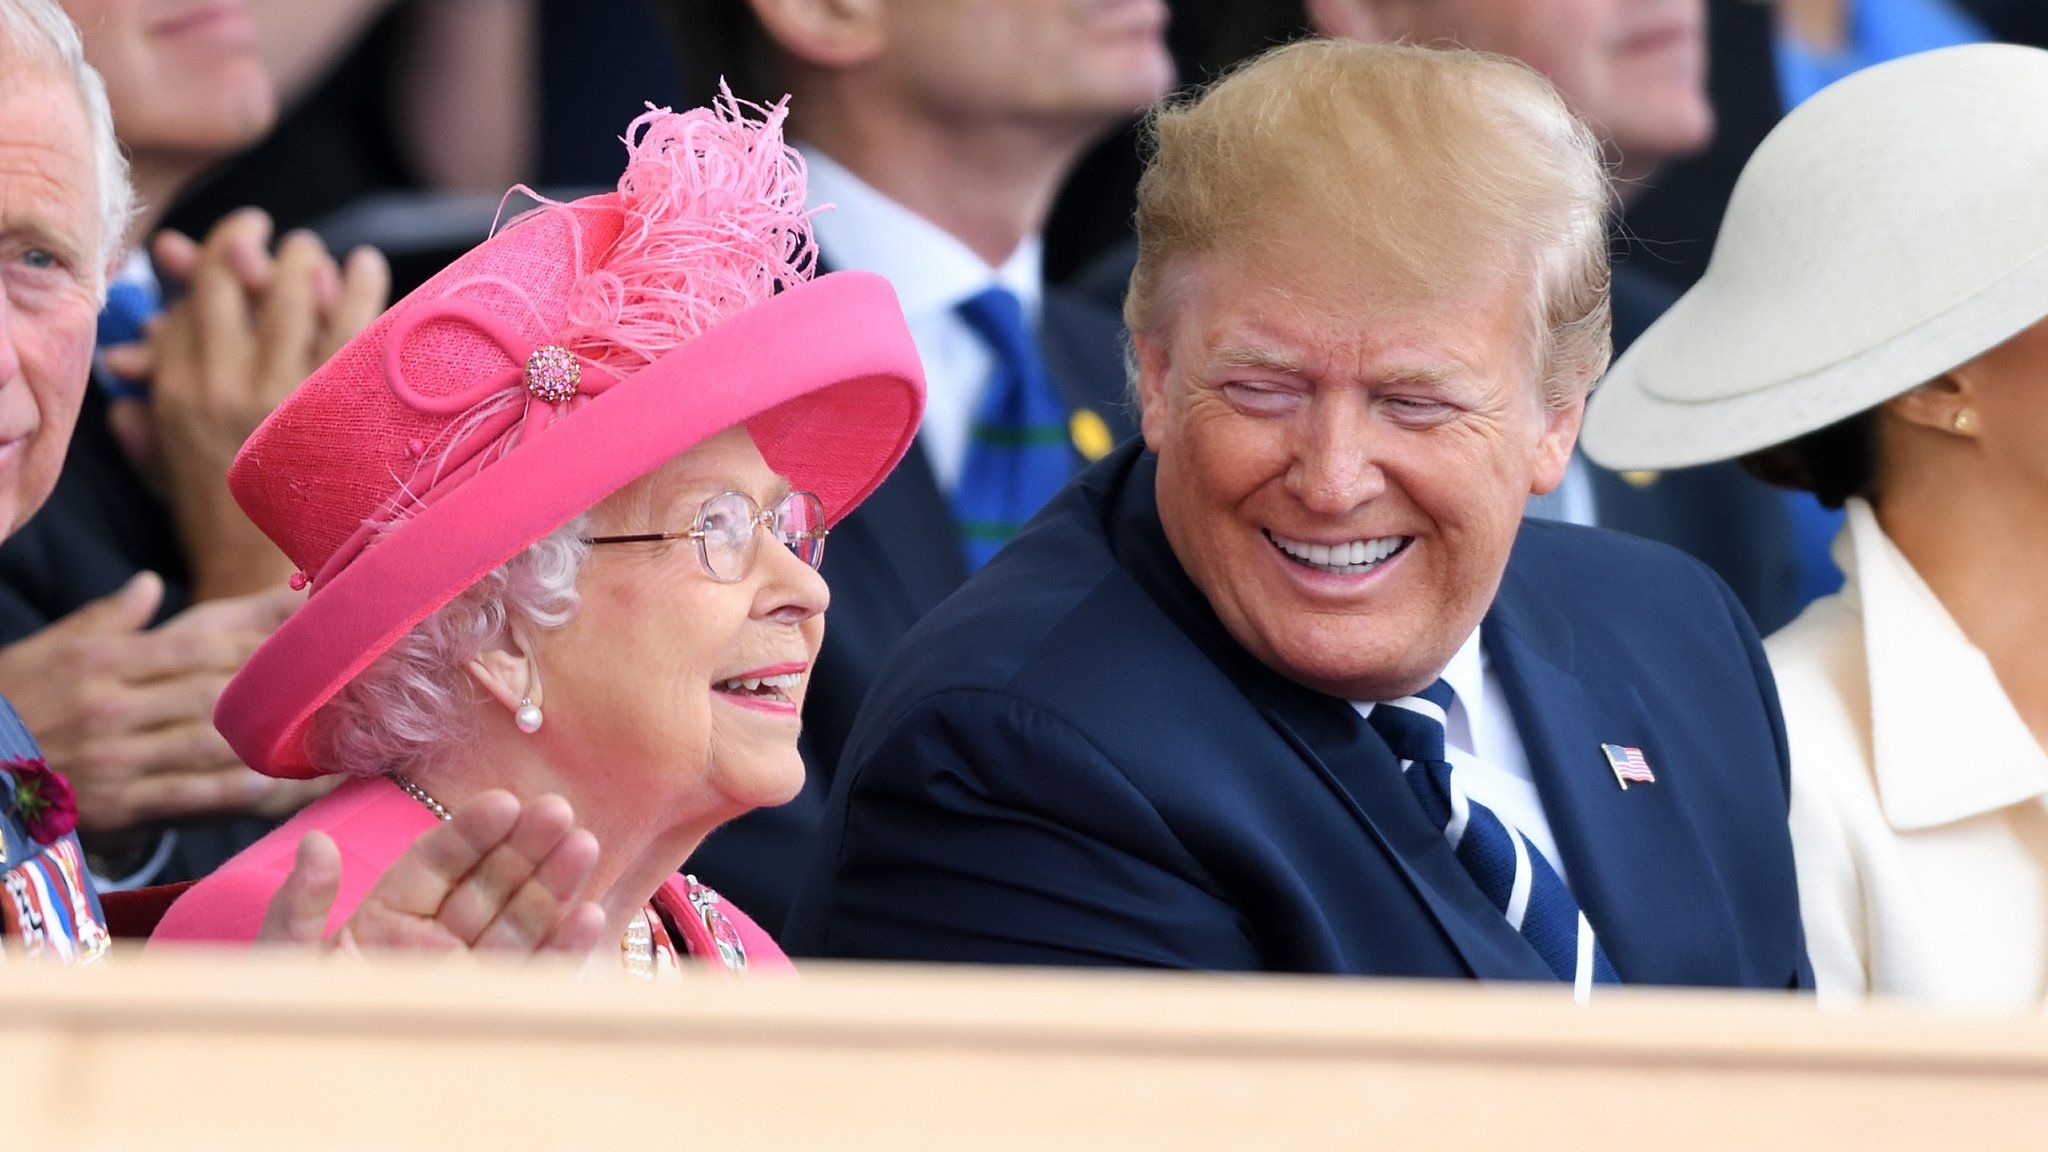 The Queen with Donald Trump in 2019